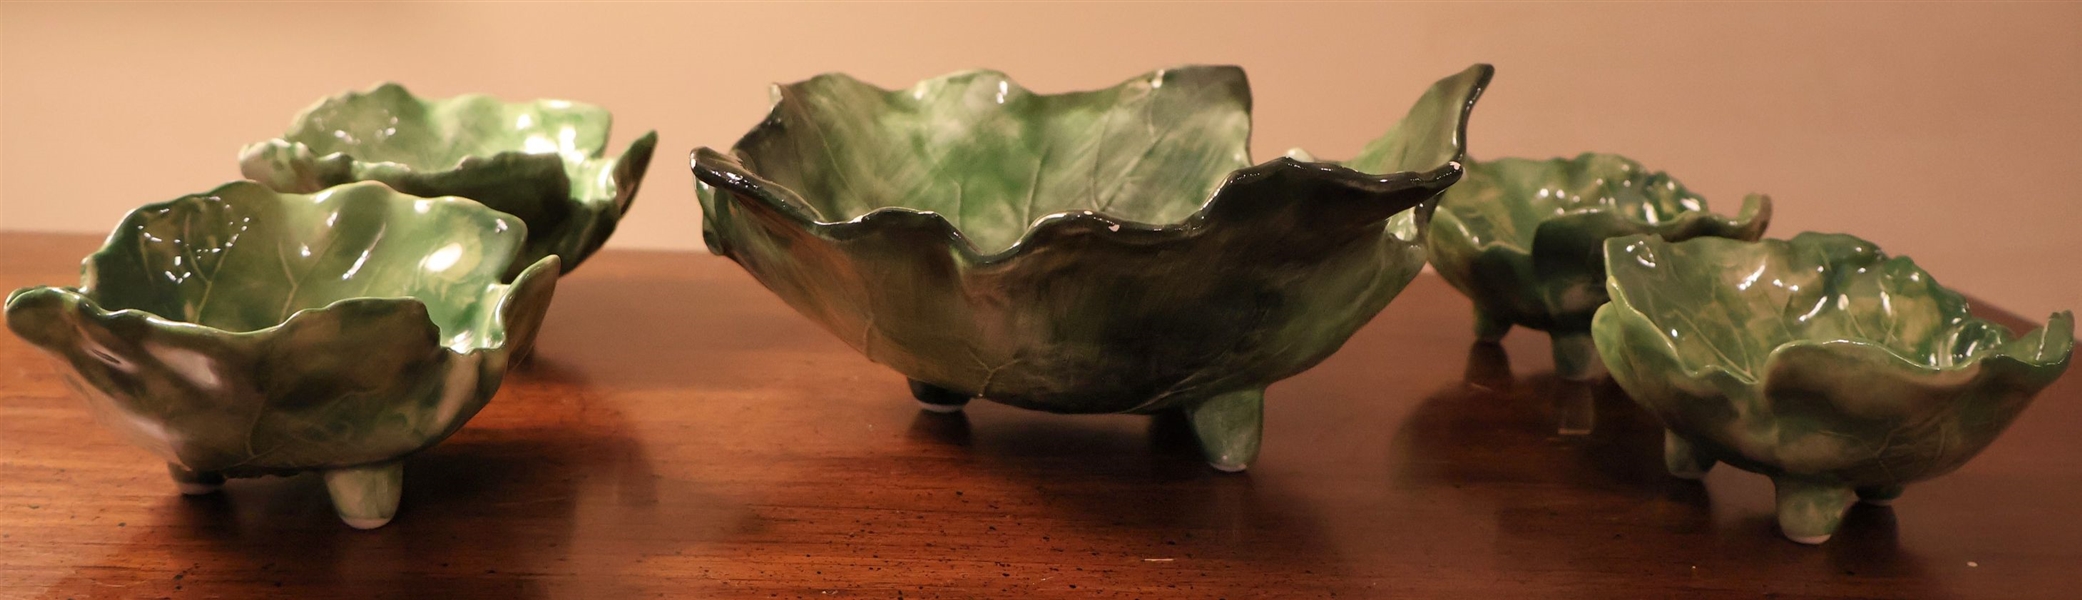 5 Vietri Green Leaf Bowls - Largest Bowl Measures 10" Across Smaller 5" Across - Some Minor Paint Flakes Around Edges